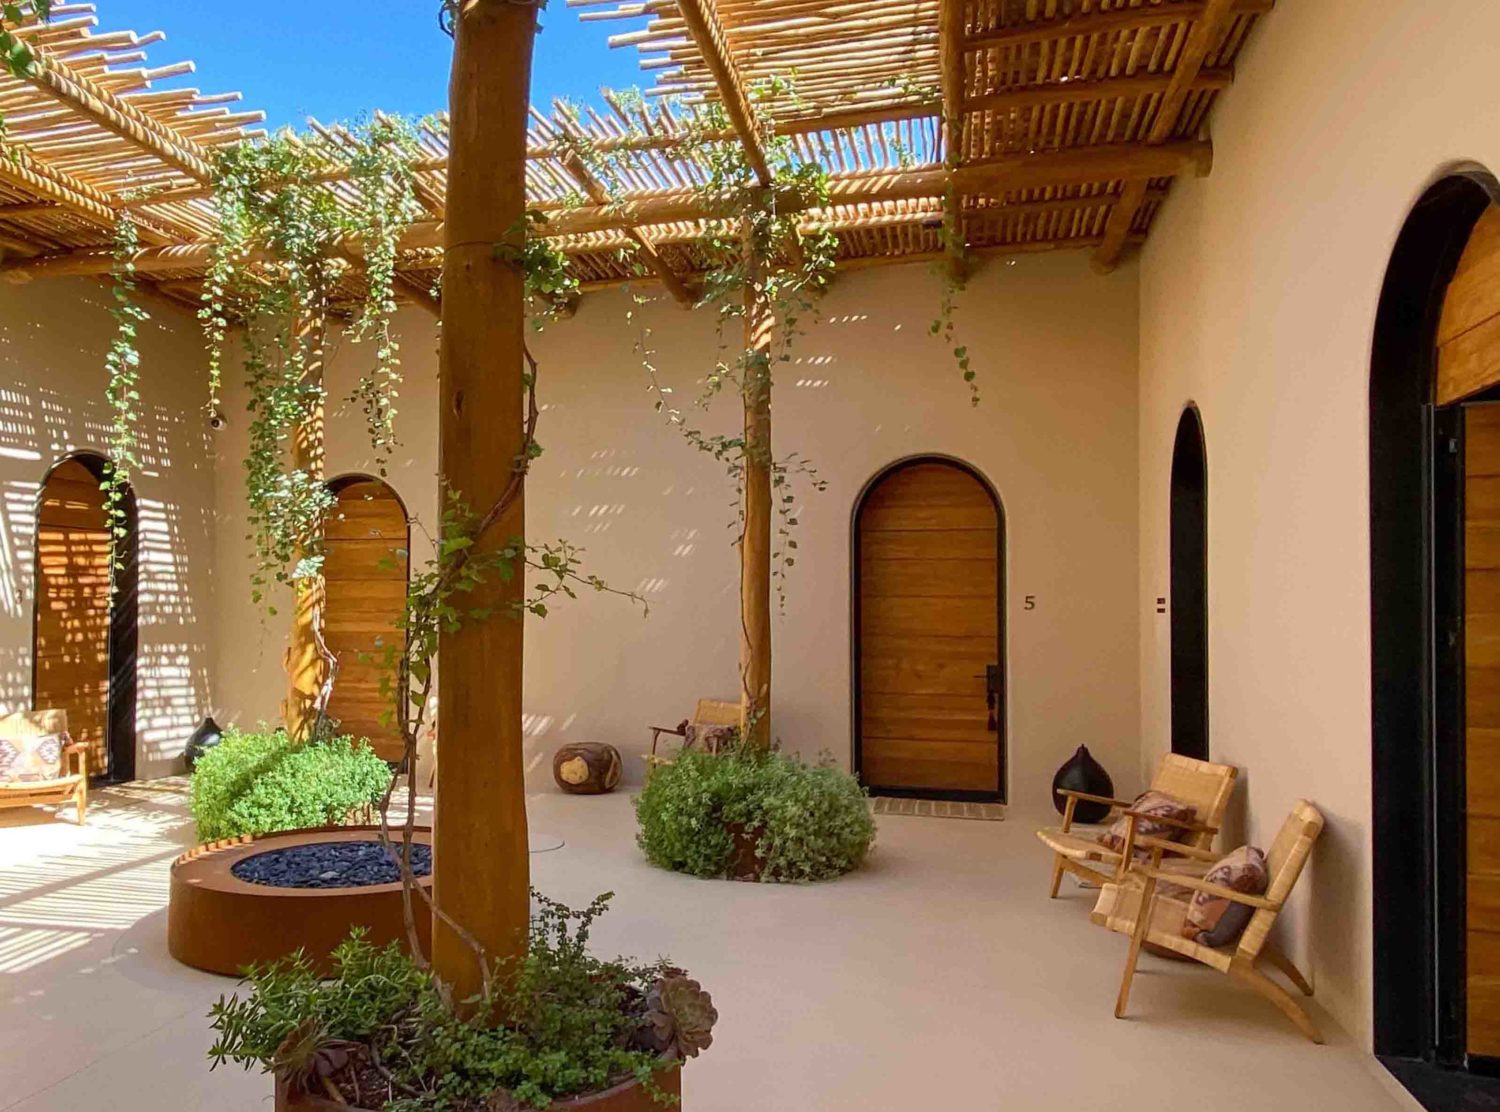 Six Senses Shaharut The inner realm and treatment rooms